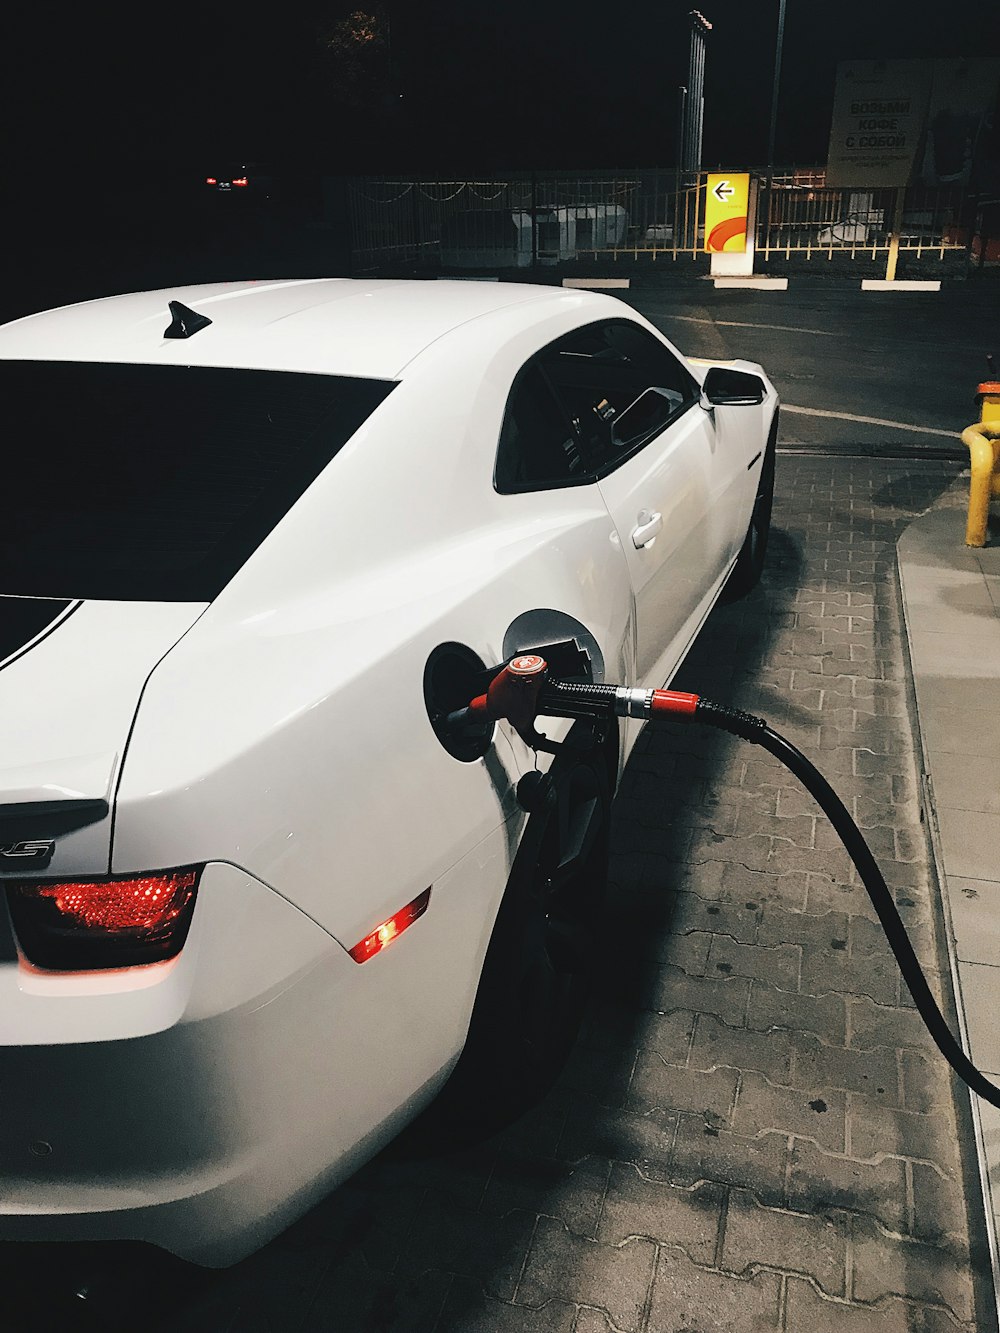 fueling white coupe at night